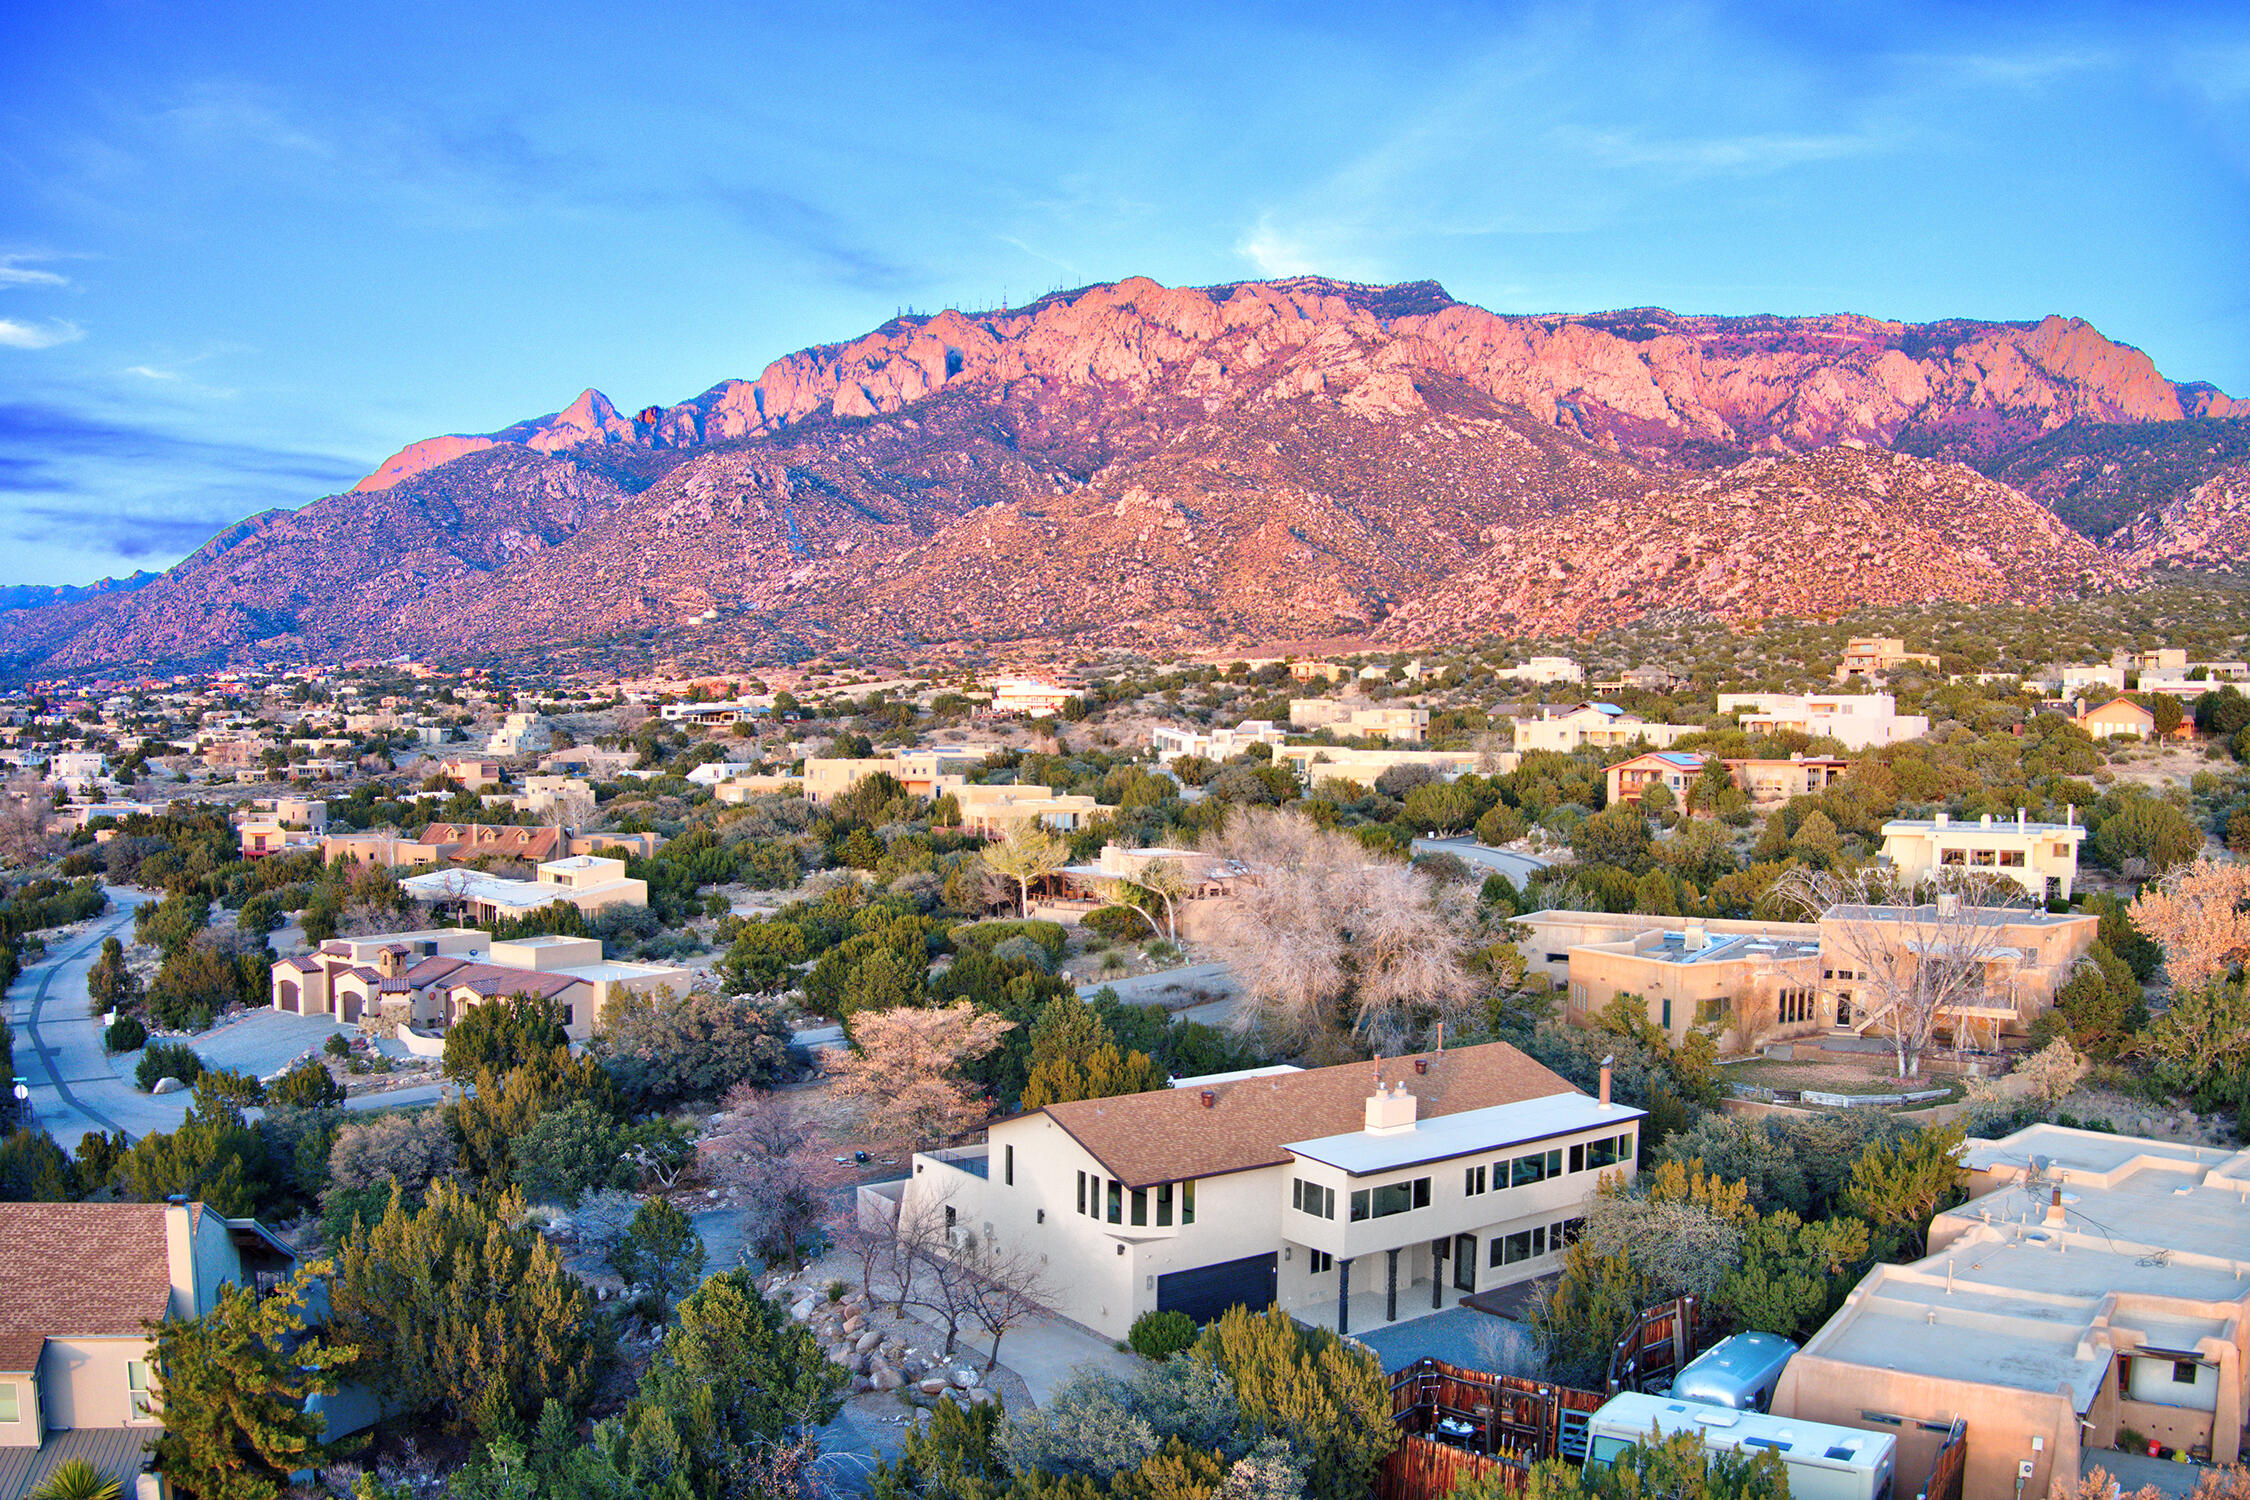 ***OPEN HOUSE Sat 12/10 & Sun 12/11 12-2pm*** World class; everything a luxury home should be! Come experience the pinnacle of fine living perched high in the foothills of the majestic Sandia Mountains overlooking Albuquerque complete w/palatial mountain views capitalized from enormous picture windows. Ascend the road towards the mountain to the residence and you will be delighted by friendly residents walking & waving, half a dozen deer frolicking, and the sweet signature New Mexican aroma from the picturesque Pinon trees. Cross the regal threshold and you will feel the quality. Masterfully-designed floorplan w/guest house, home gym w/shower svc, inspirational office w/outdoor views, big loft & wet bar, luxurious sunroom, and easy-care outdoor living on spacious balconies. SUNSETS GALORE